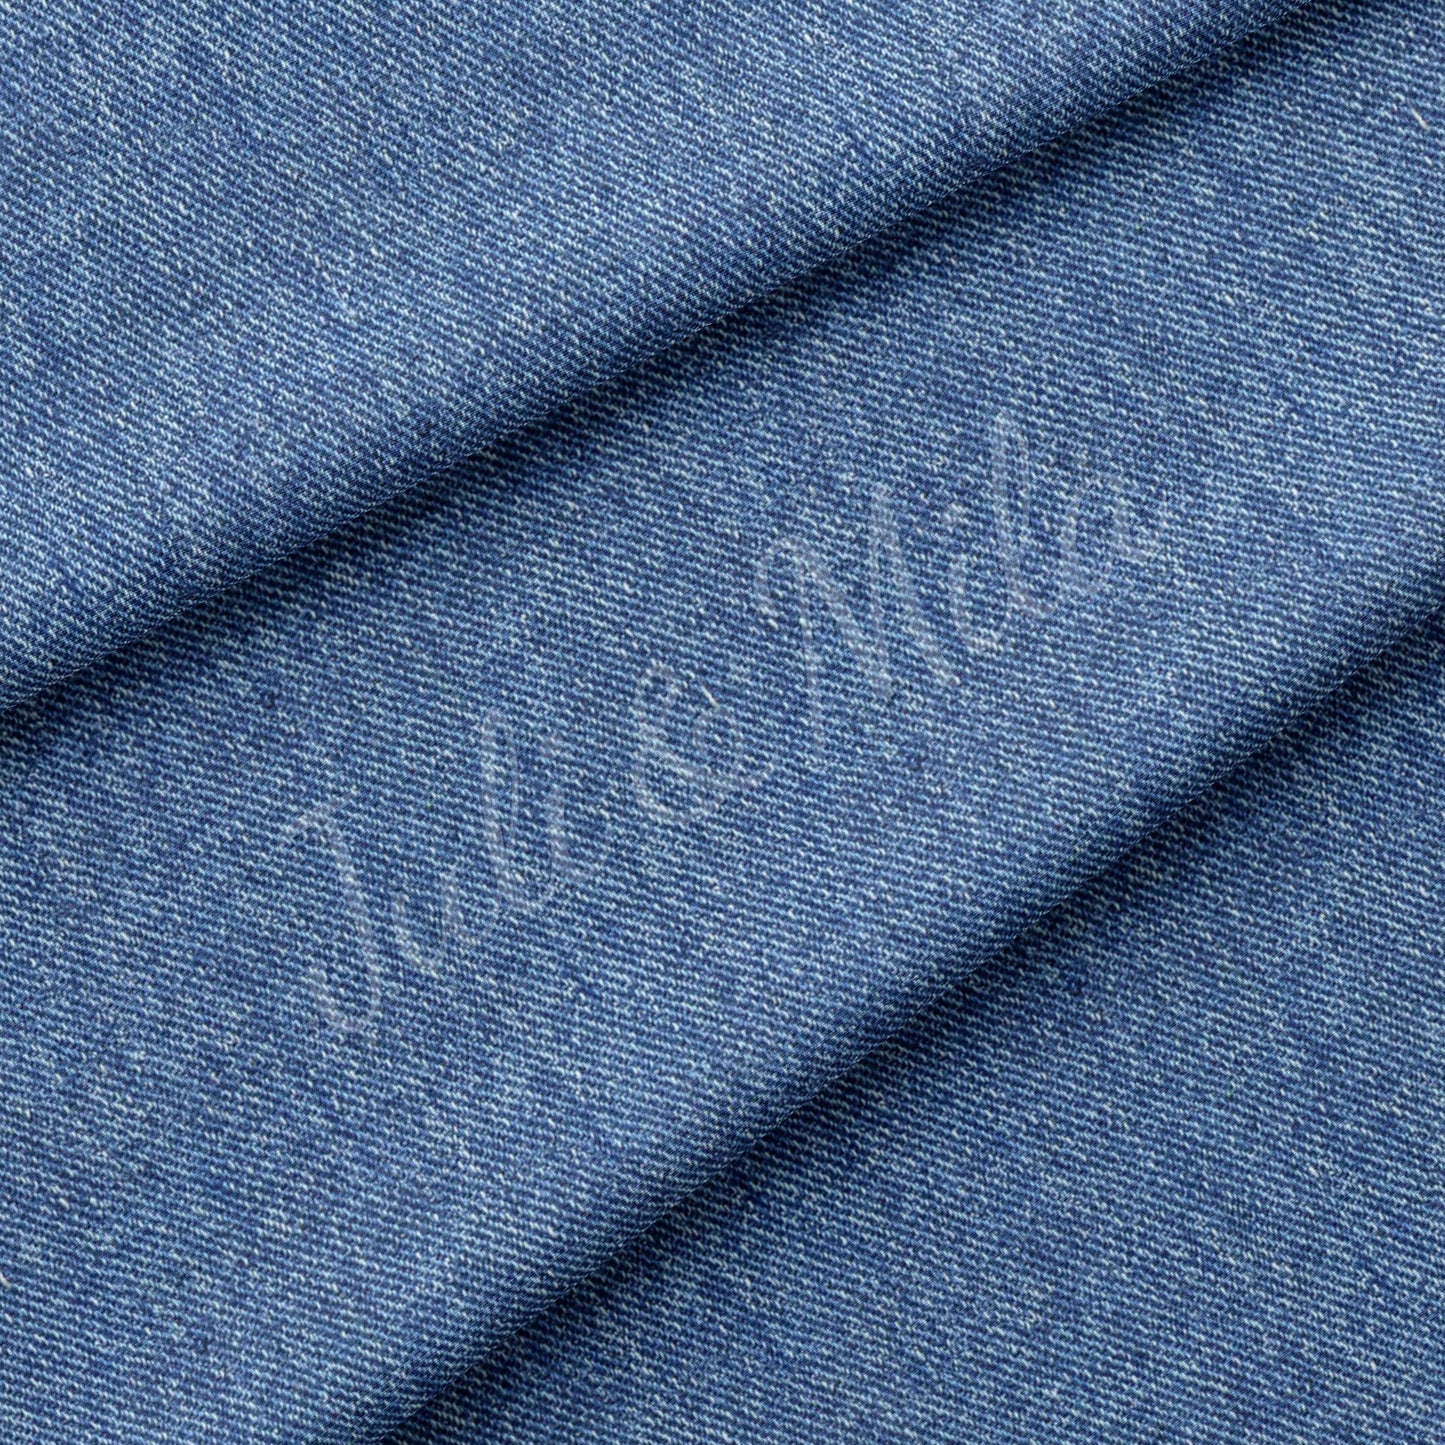 DBP Fabric Double Brushed Polyester Fabric Denim